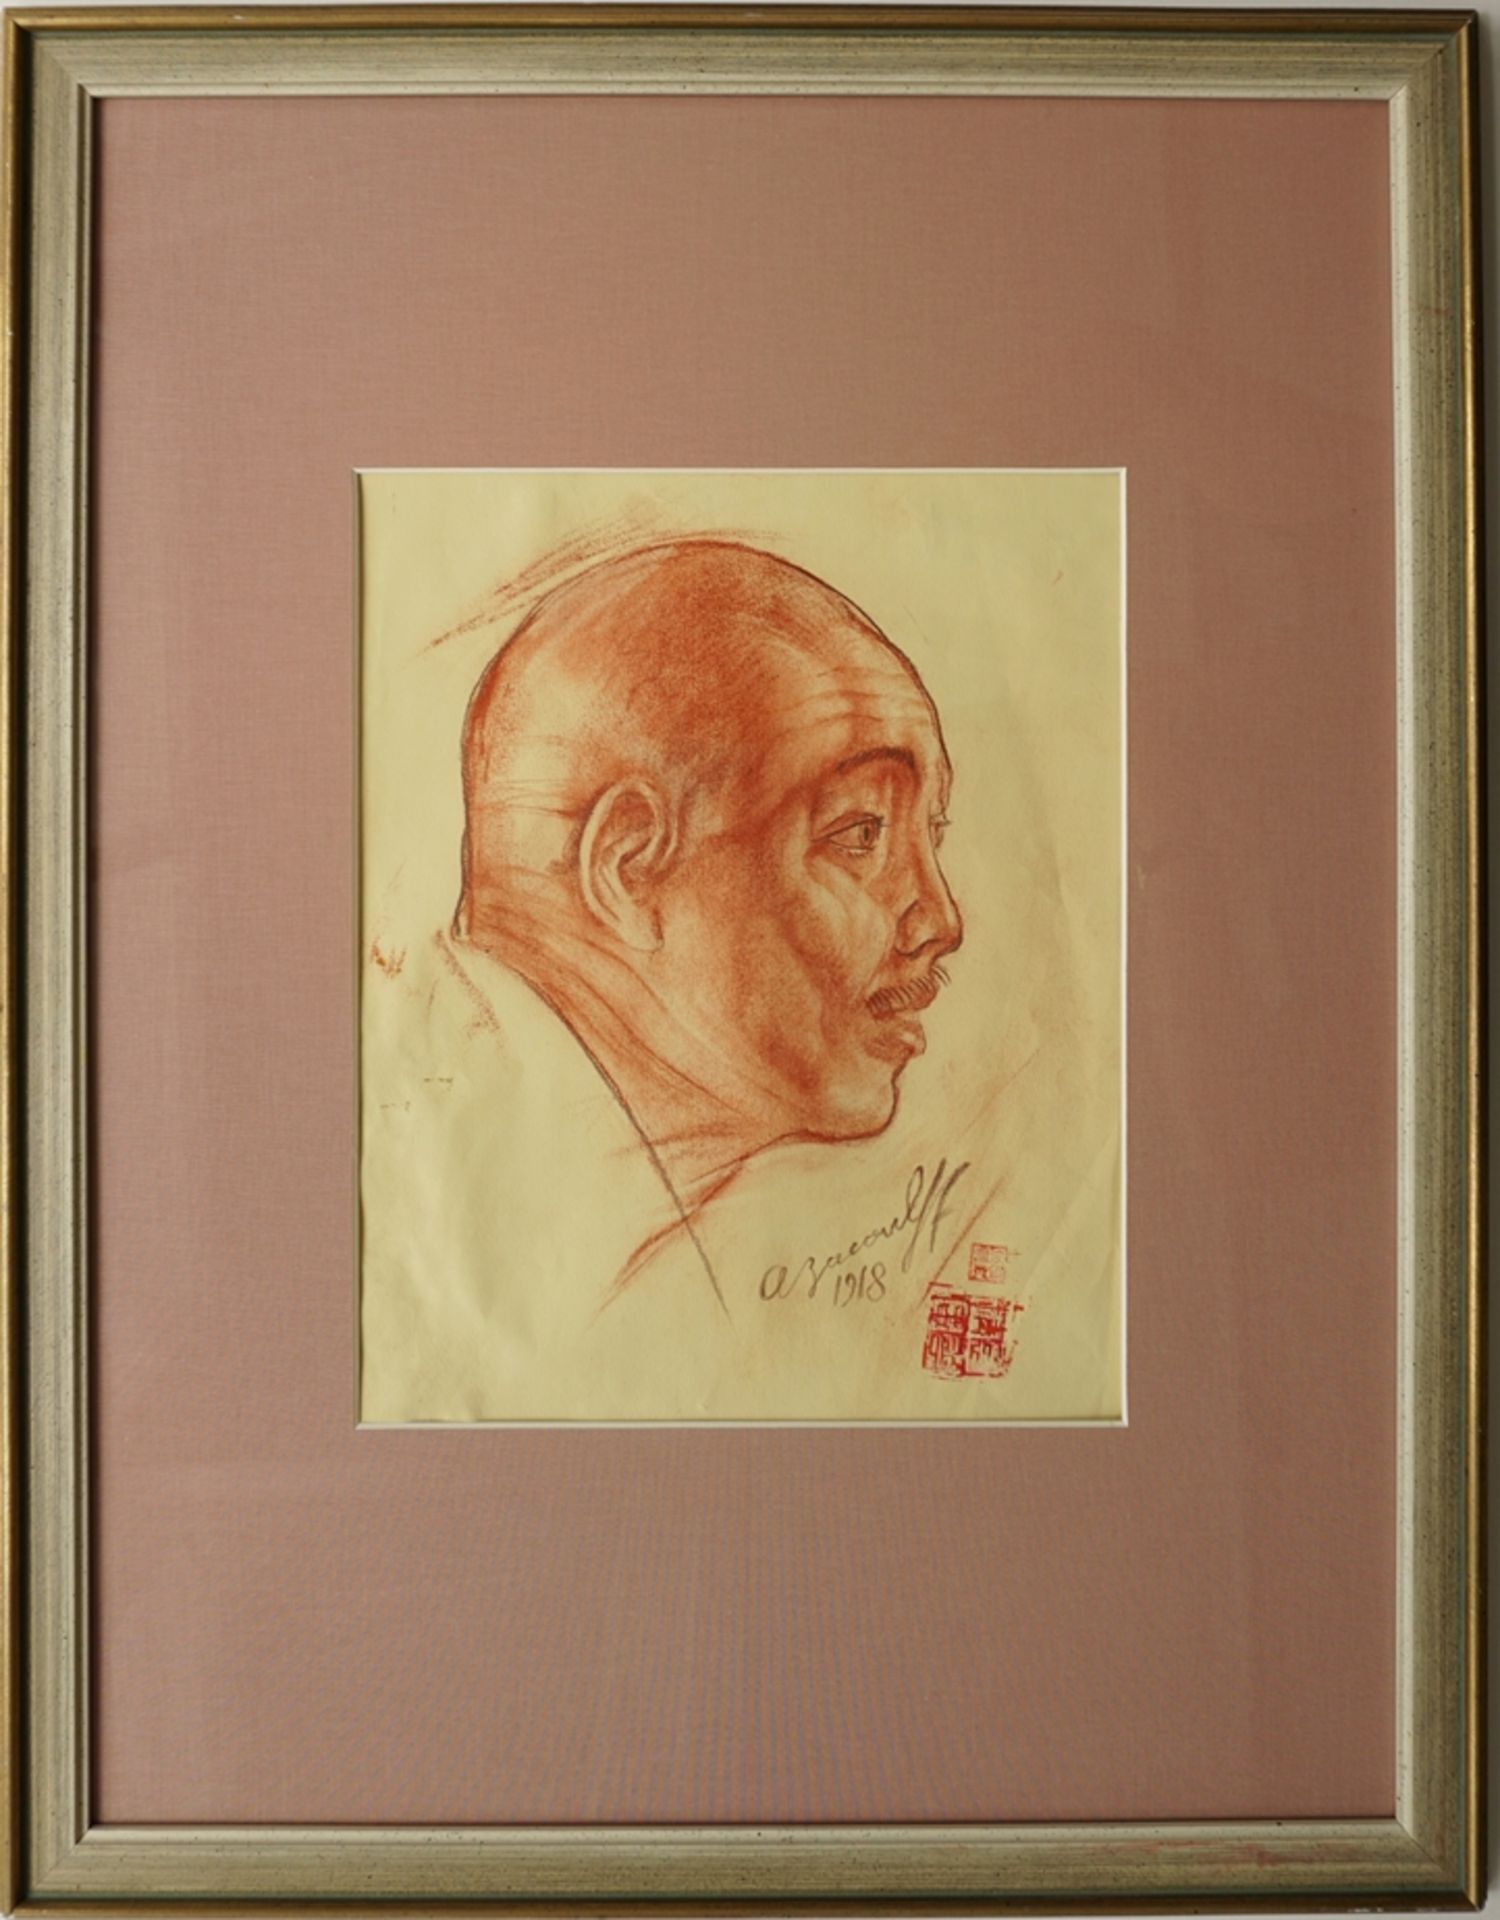 probably copy after Alexander E. Iacovleff (1887-1938, RUS), "Portrait of a Chinese", red chalk/pap - Image 2 of 2